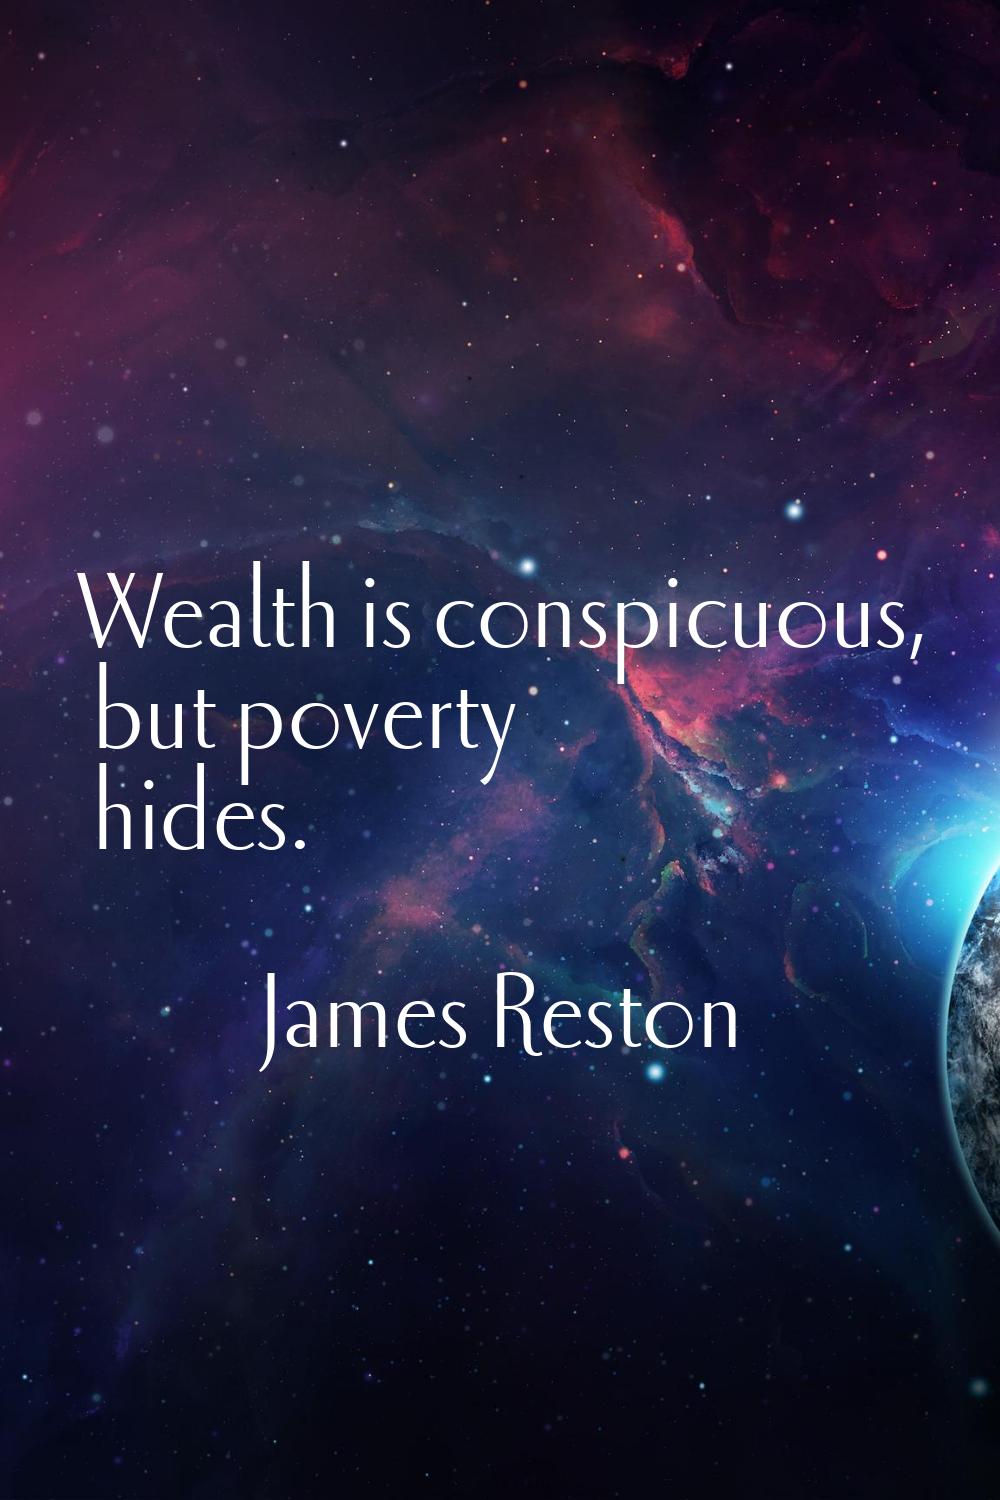 Wealth is conspicuous, but poverty hides.